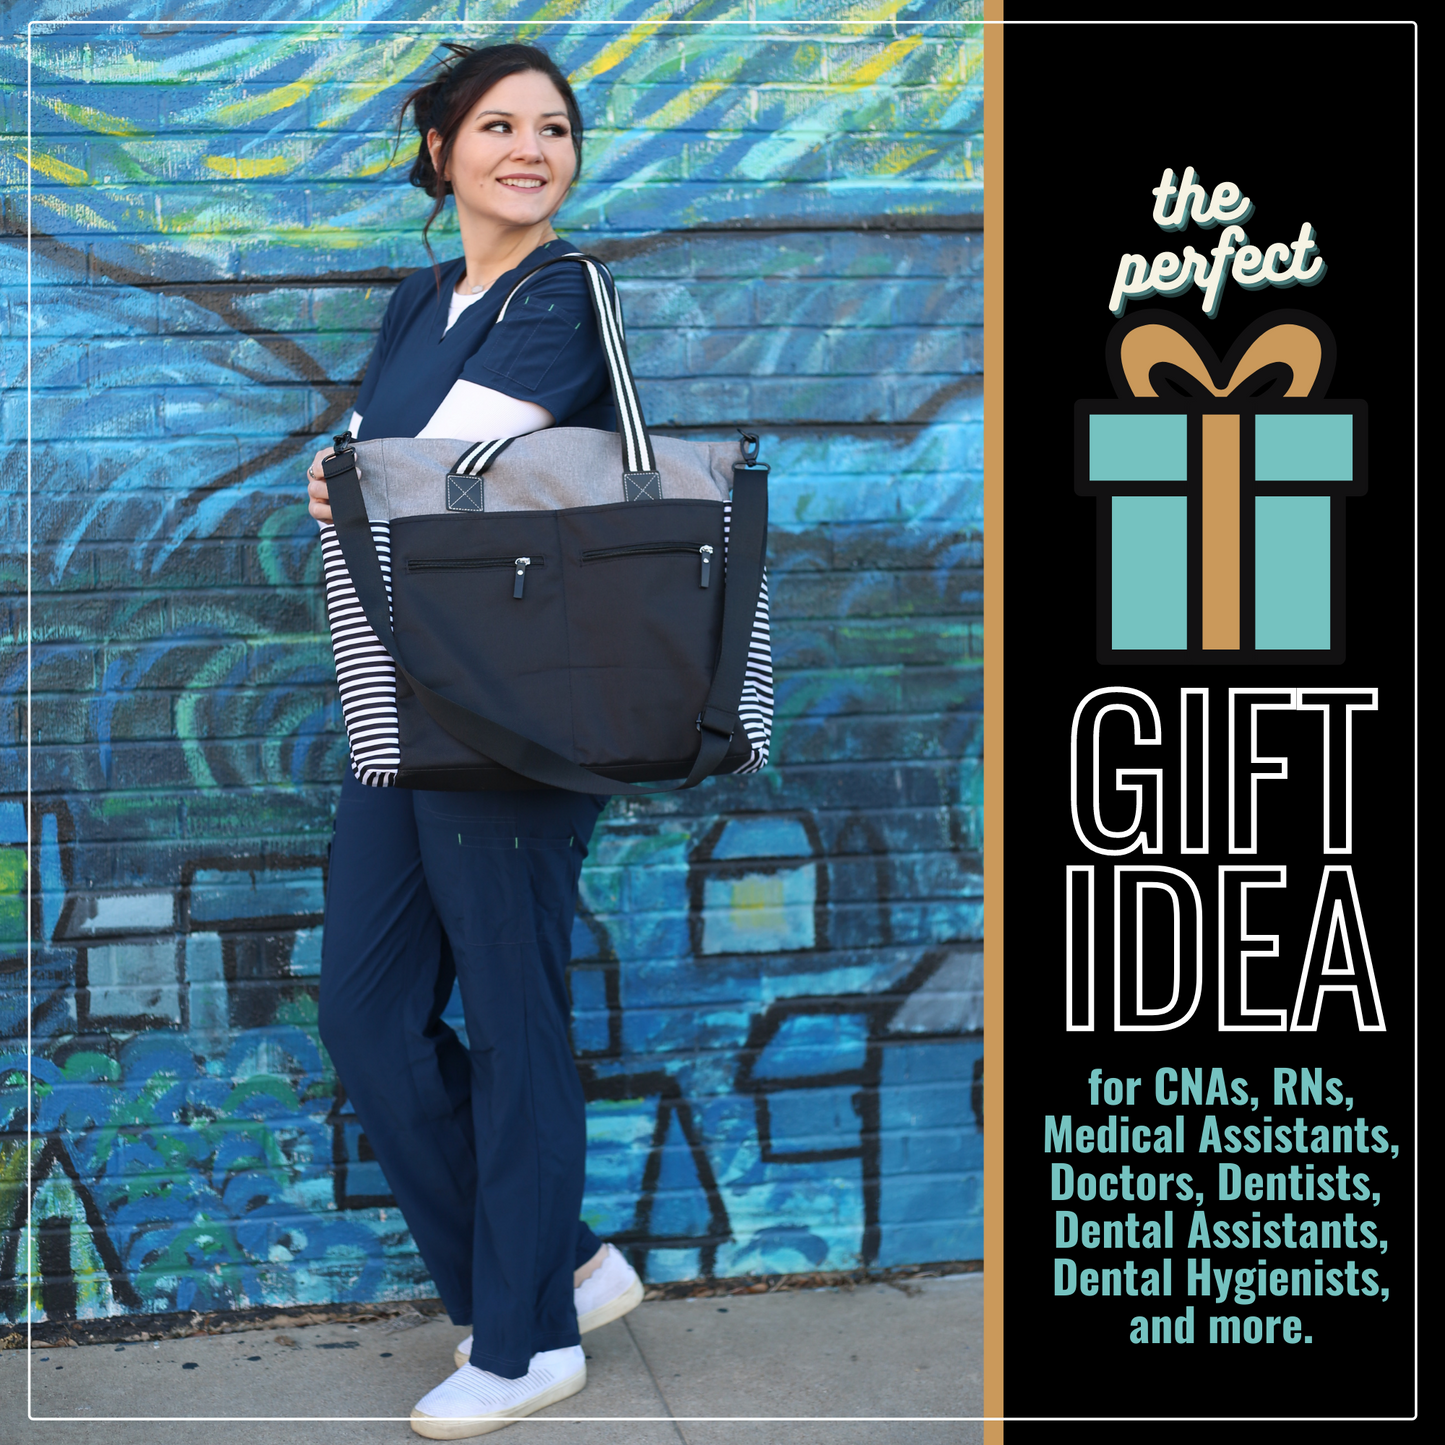 Scrub Life LouLou Gray Tote Bag for Medical Workers - Outlet Deal Utah